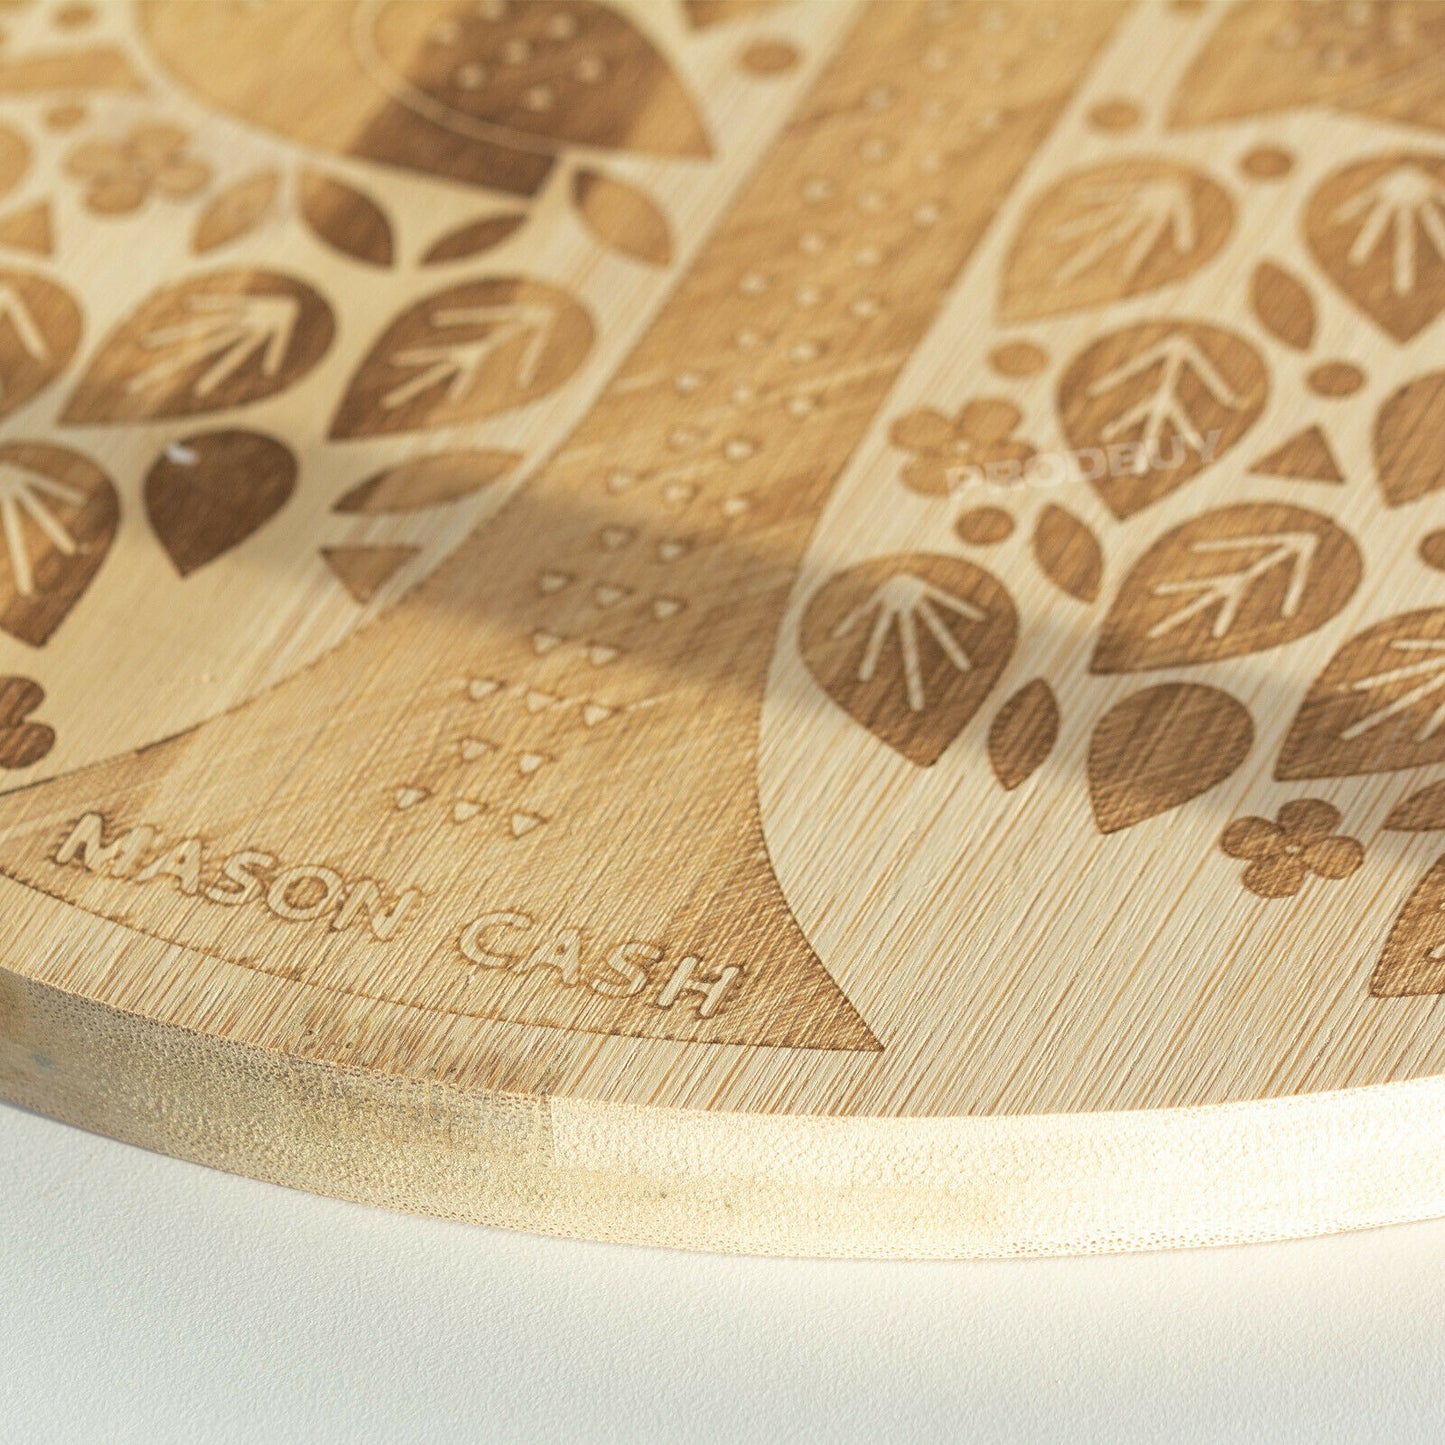 Tree & Owls Bamboo Chopping Board Decorated 32cm Round